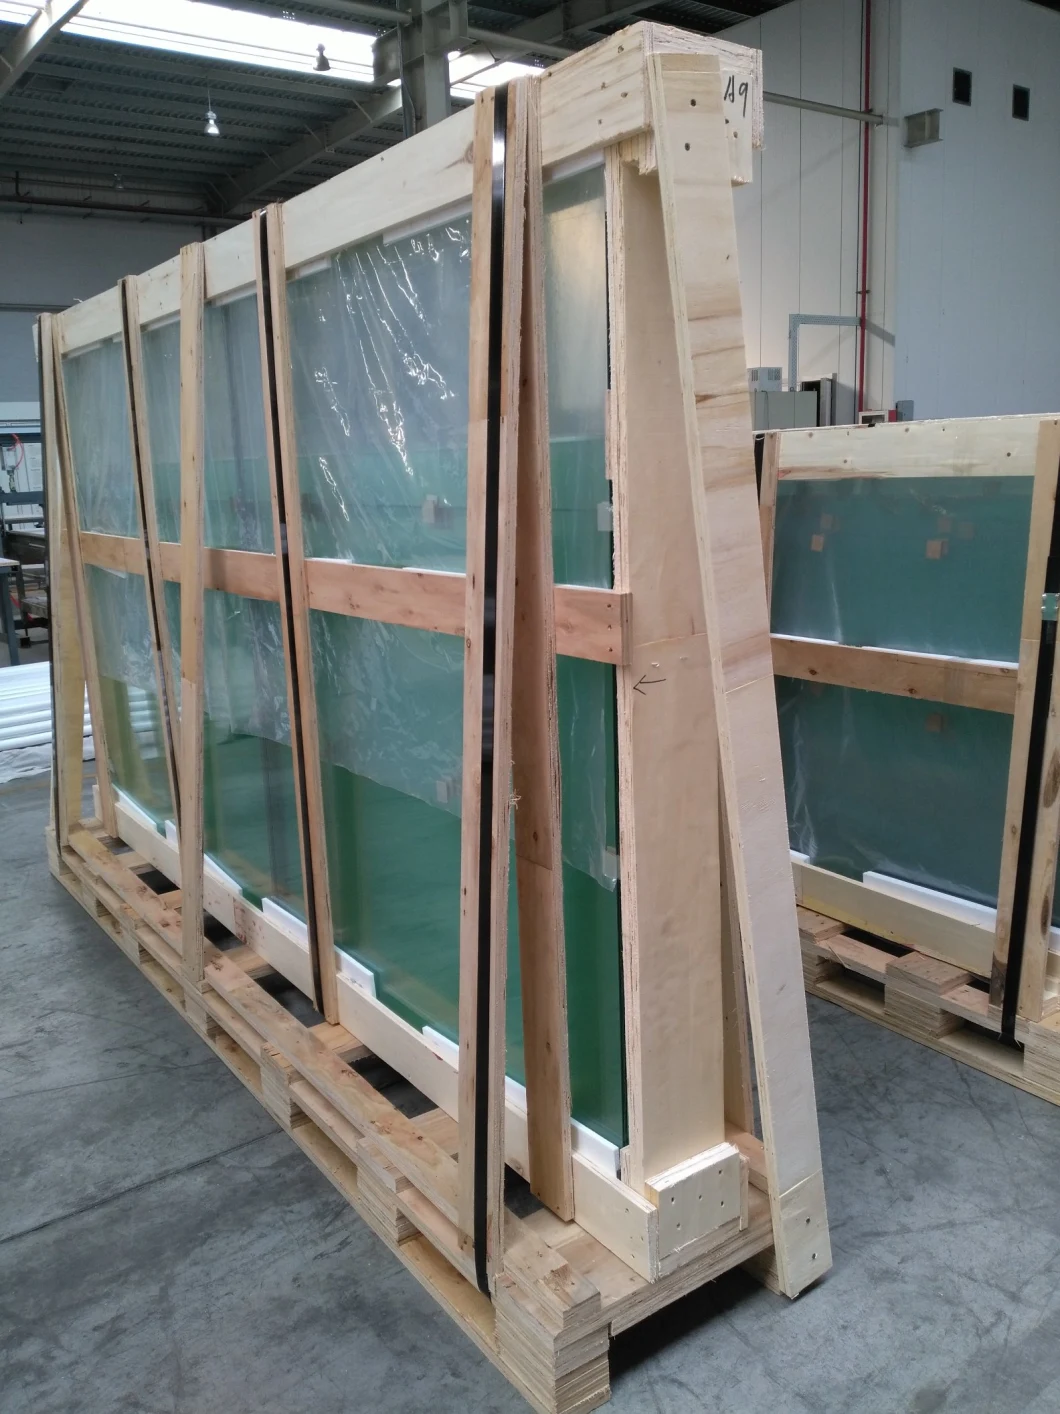 Frosted Laminated Glass for Hotel Bathroom Glass Door in USA Hotel Chain Project